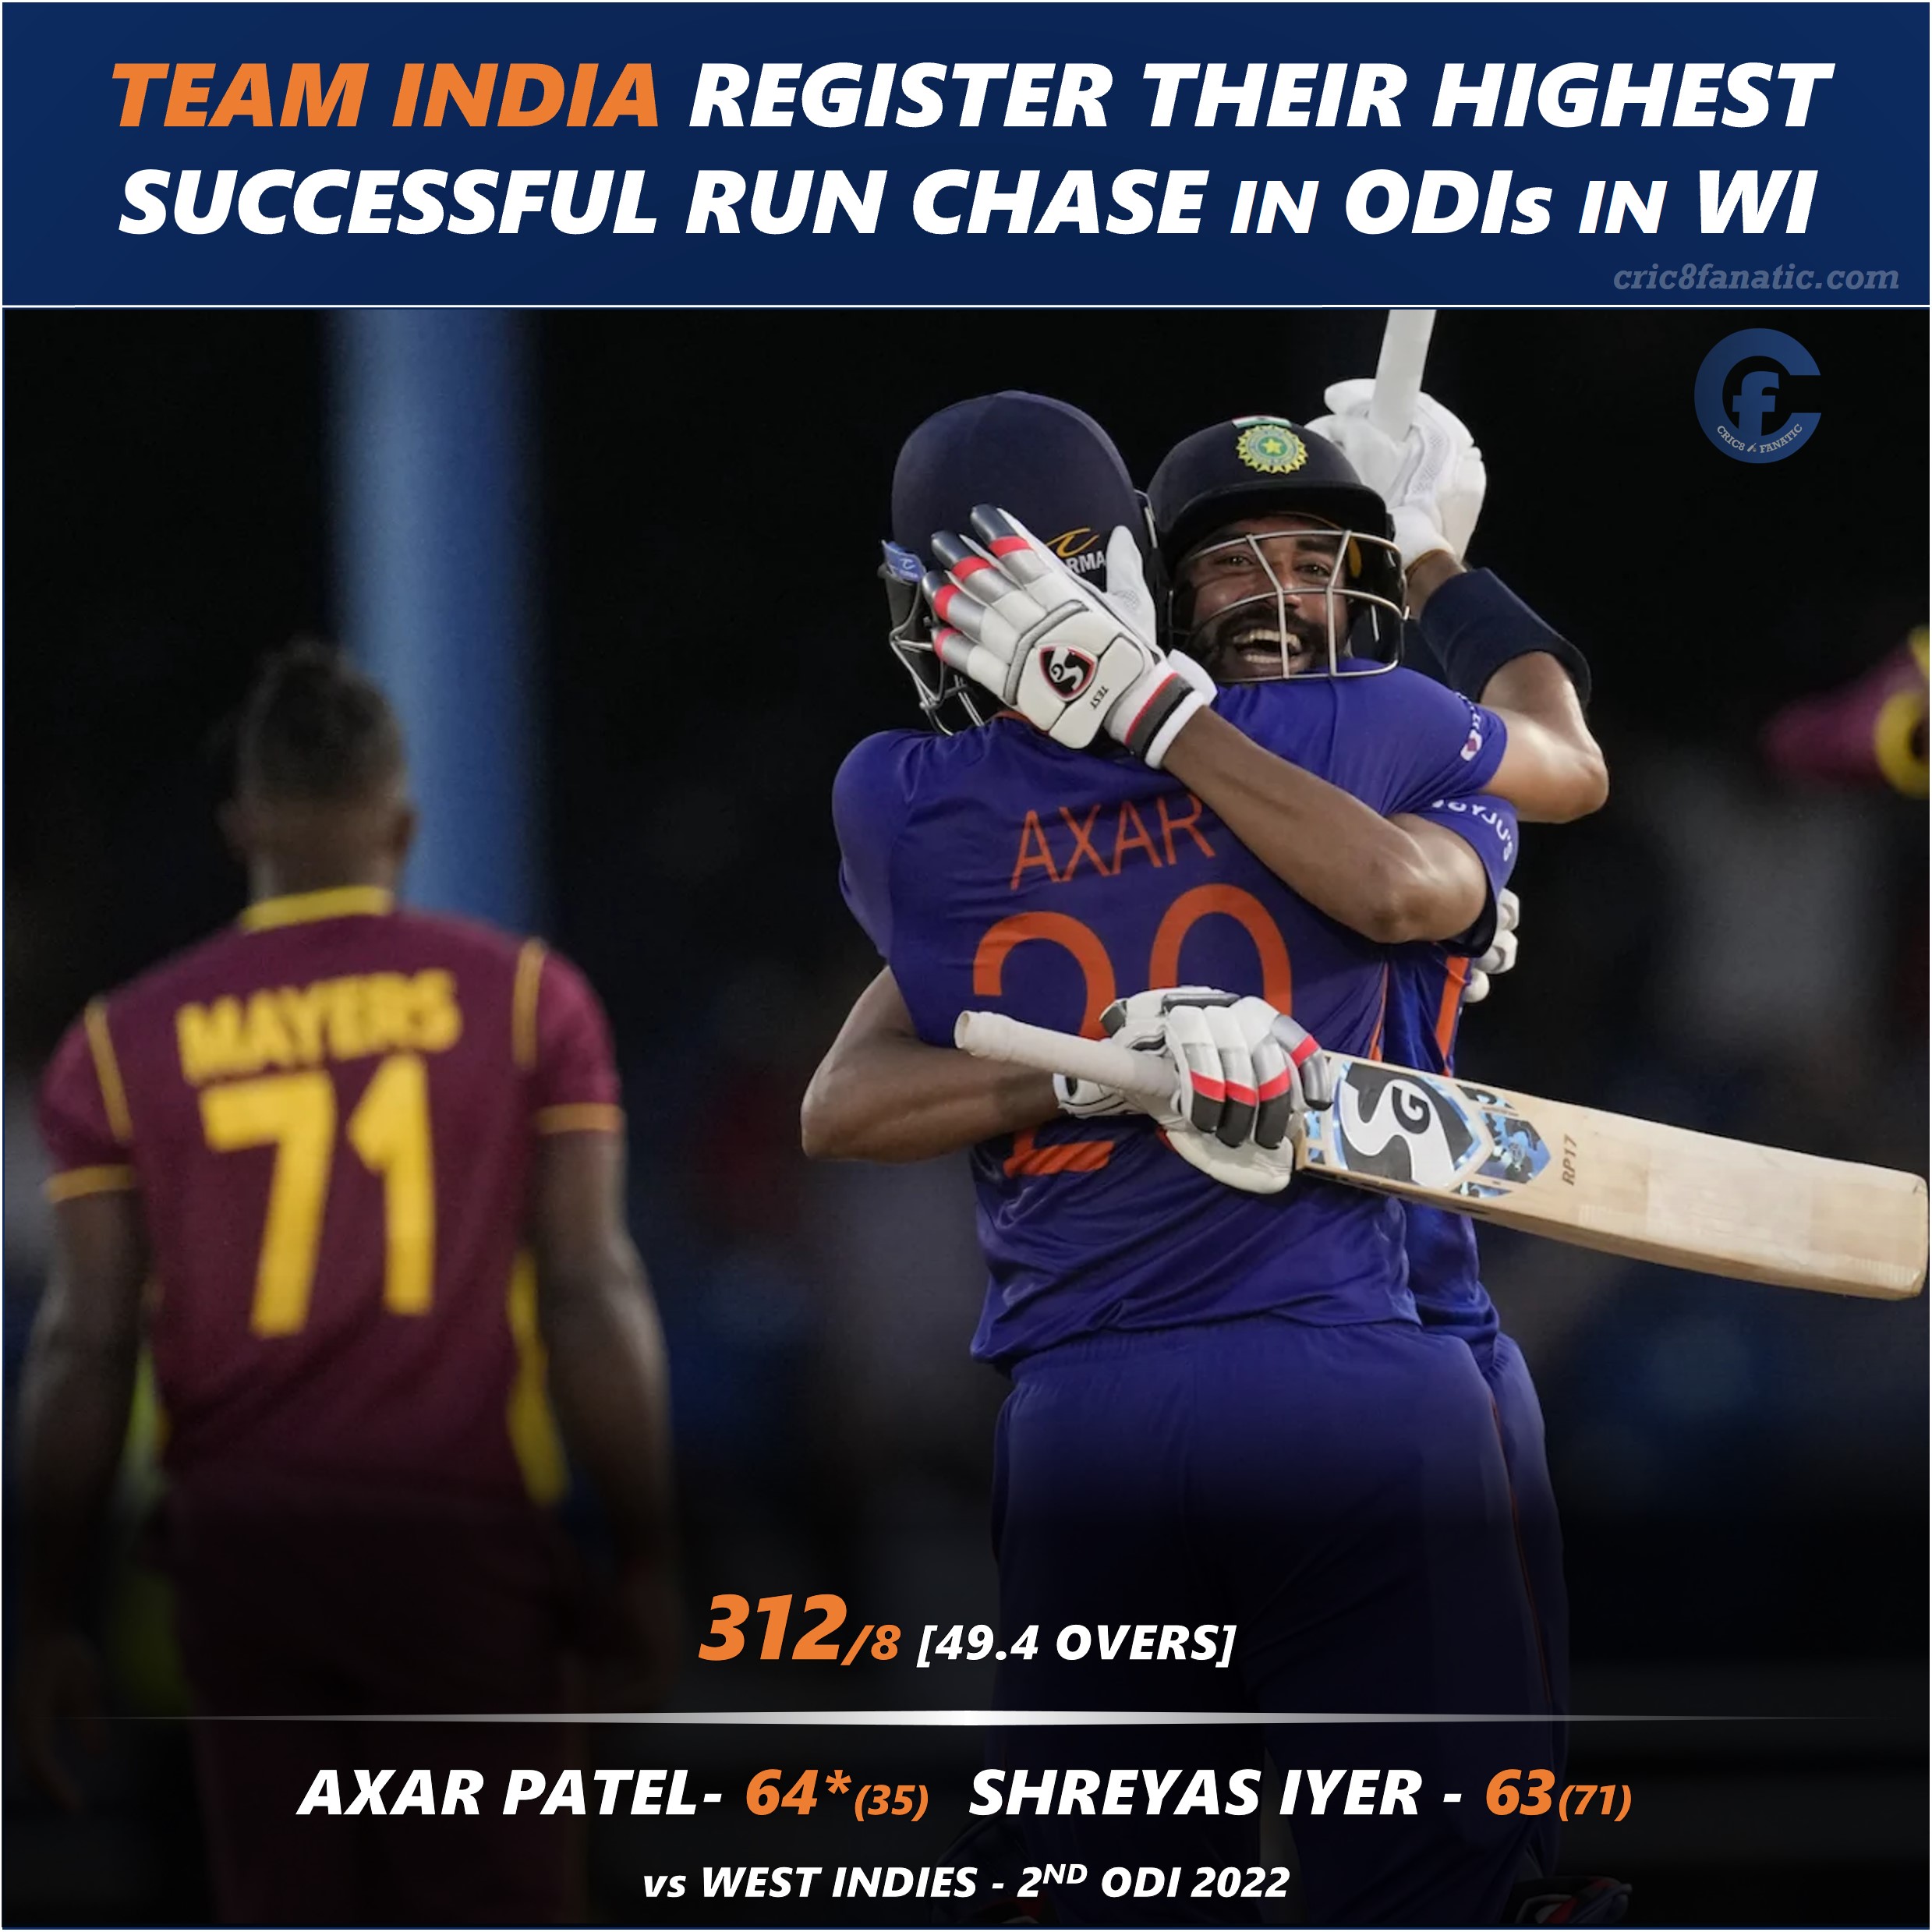 highest successful run chase for team india in odis in west indies new